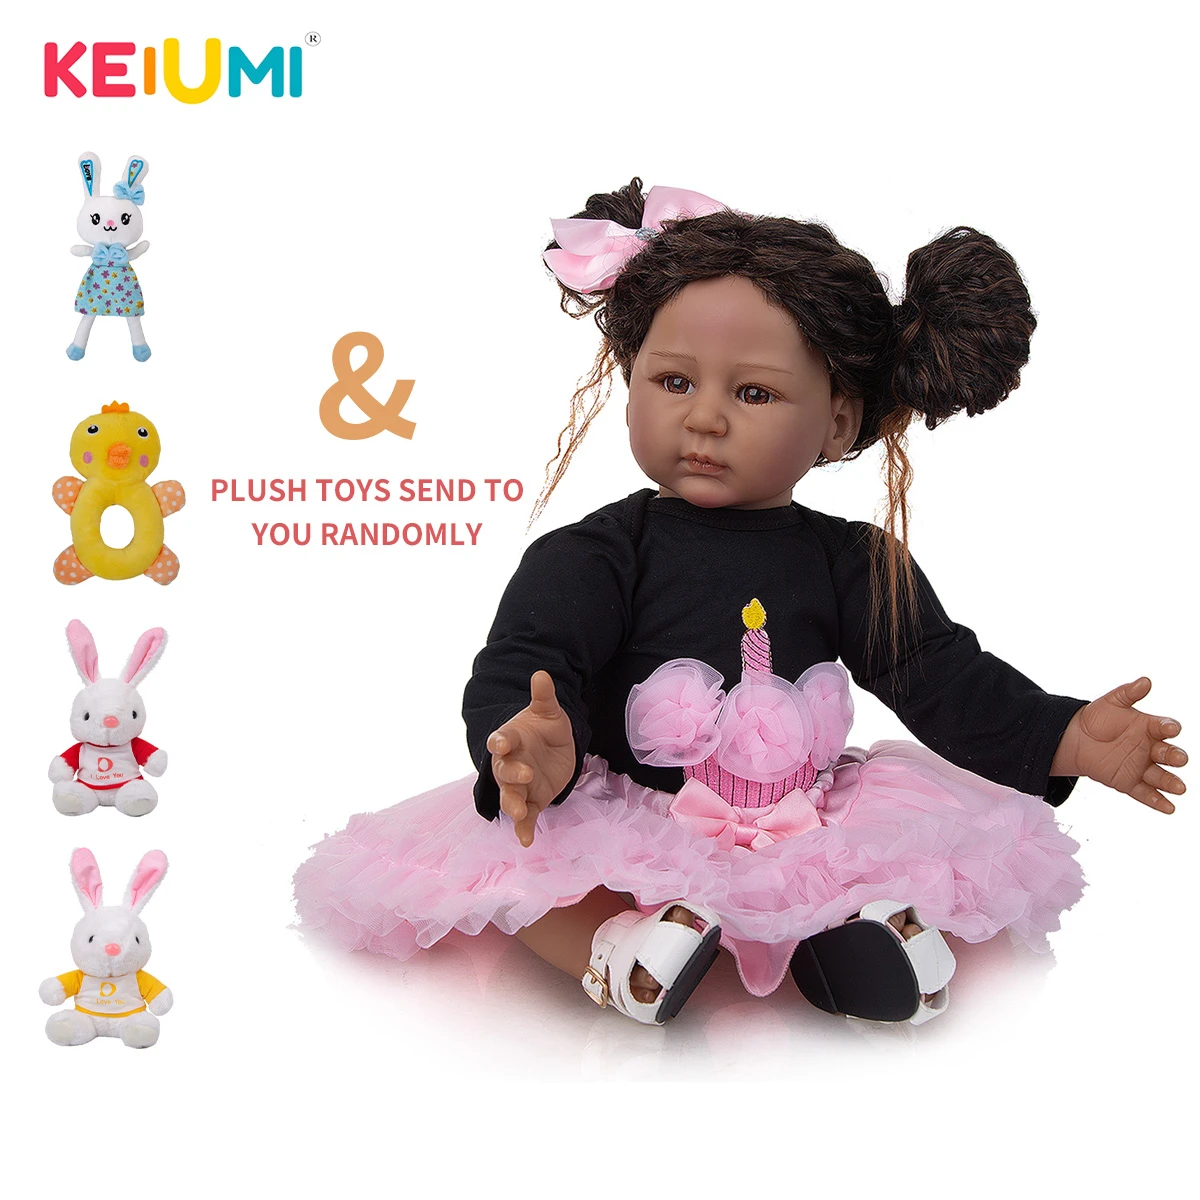 Diy Hairstyle Reborn Baby Girl Toddler Dolls Black Skin Silicone 55 Cm  Cloth Body Babies Dolls With Random Toys For Kids Gifts - Reborn Dolls -  AliExpress